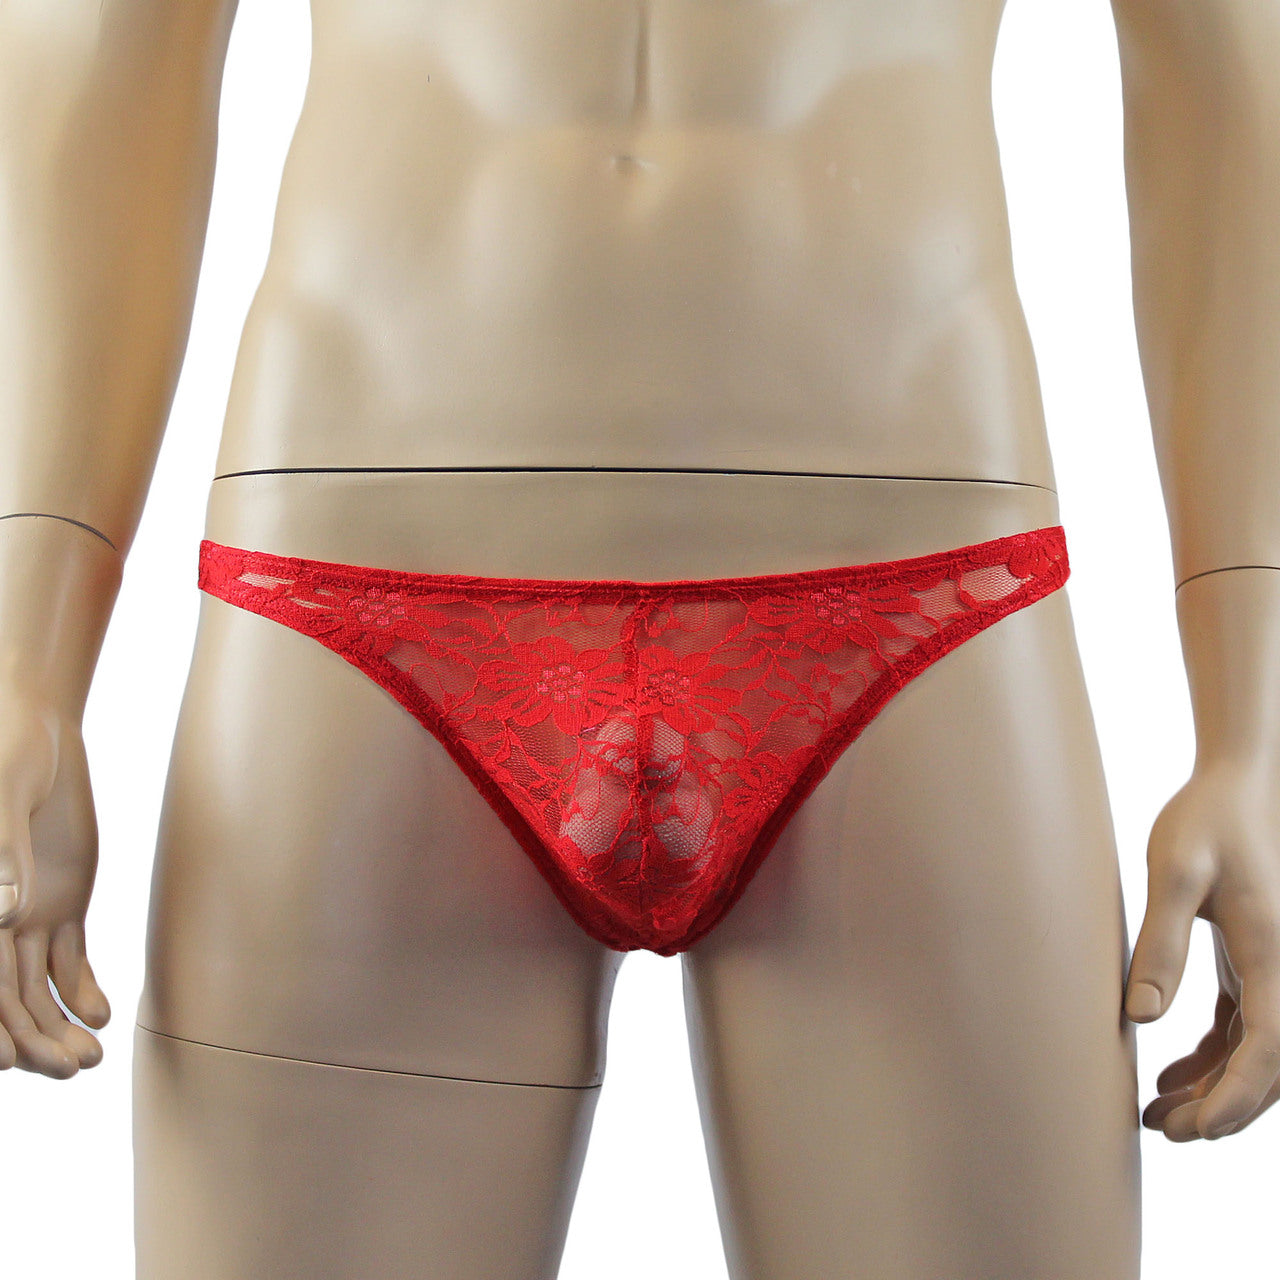 Mens Sexy Lingerie Lace Thong G string Red